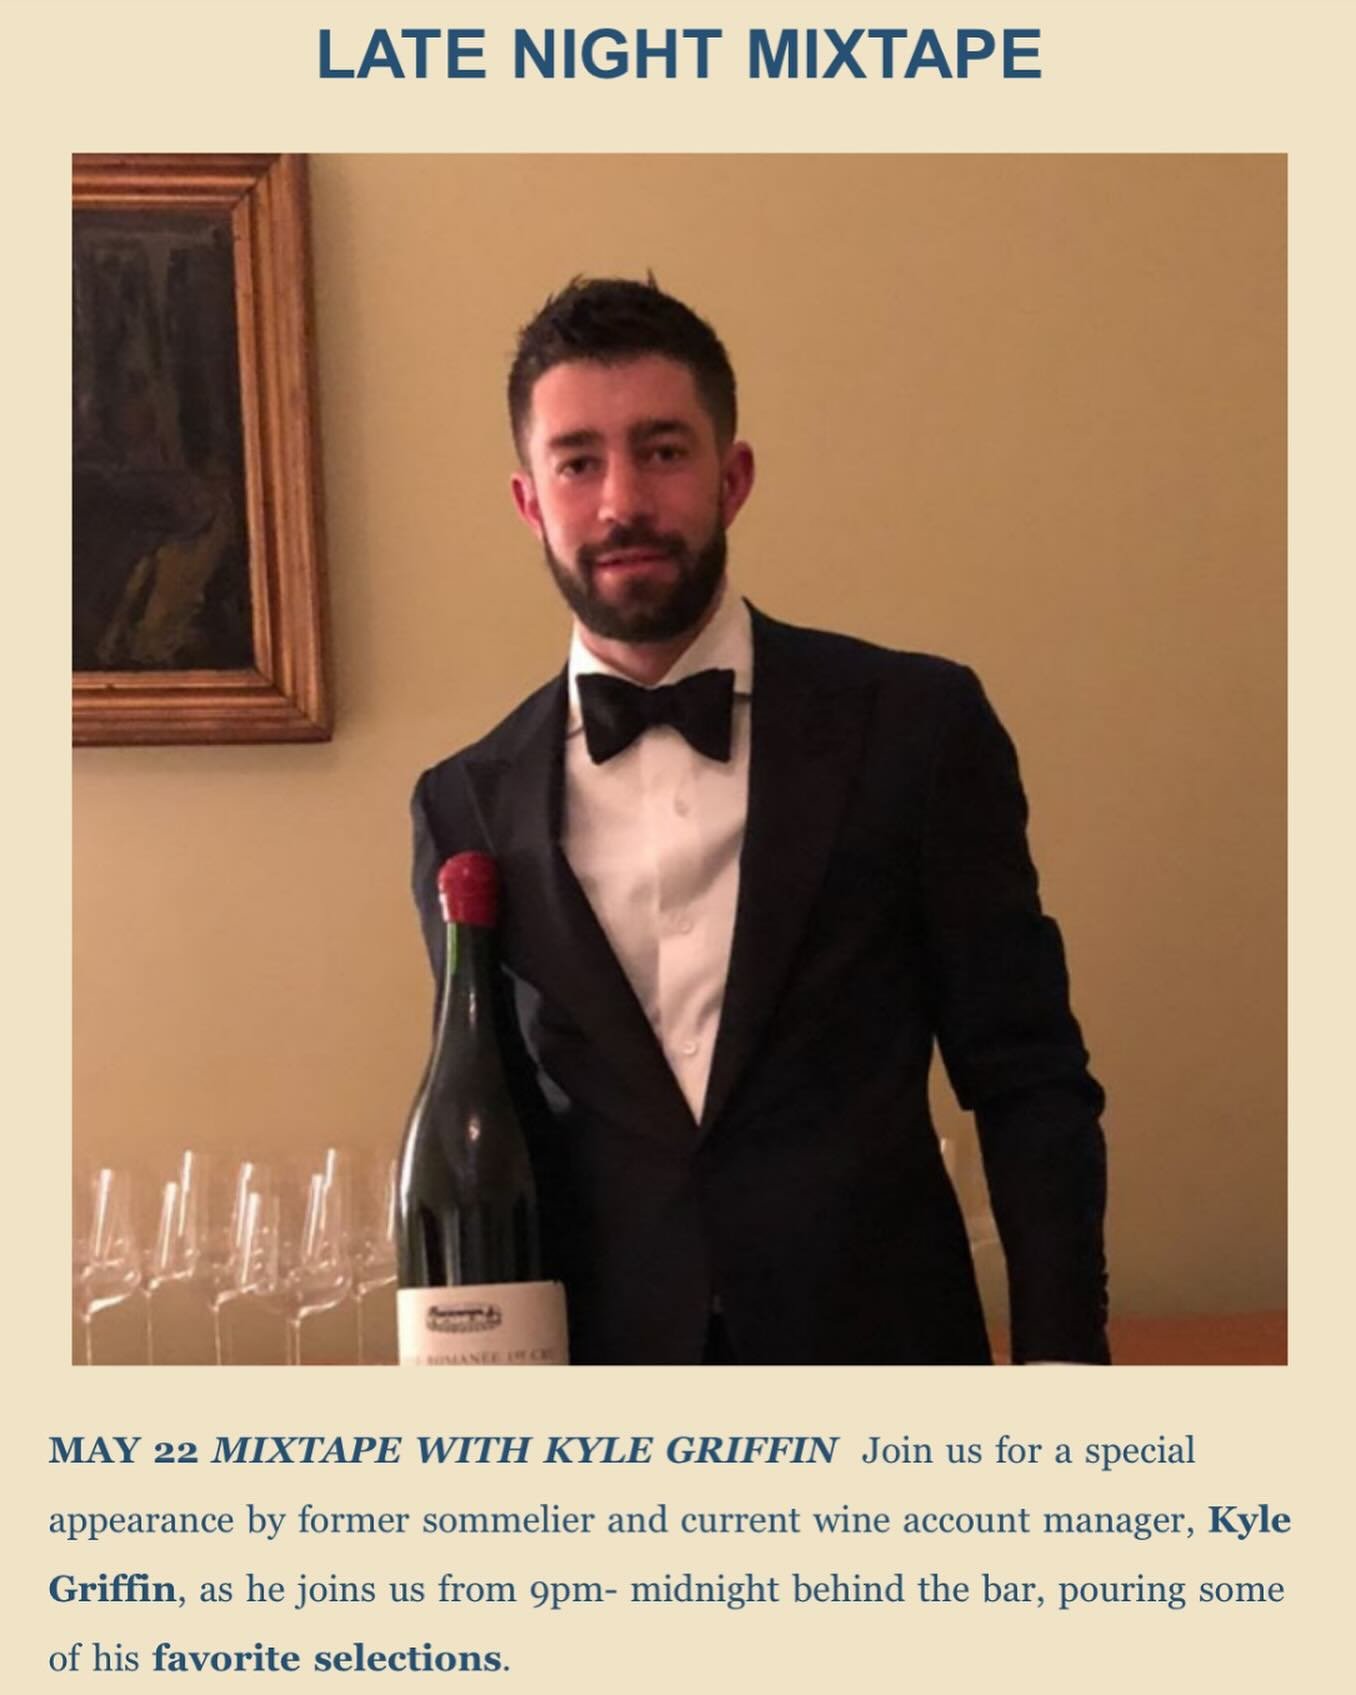 Mixtape with our very own Kyle Griffin! 
Special wine tasting @compagnienyc 
Wednesday, May 22 9pm-midnight
Don&rsquo;t miss it